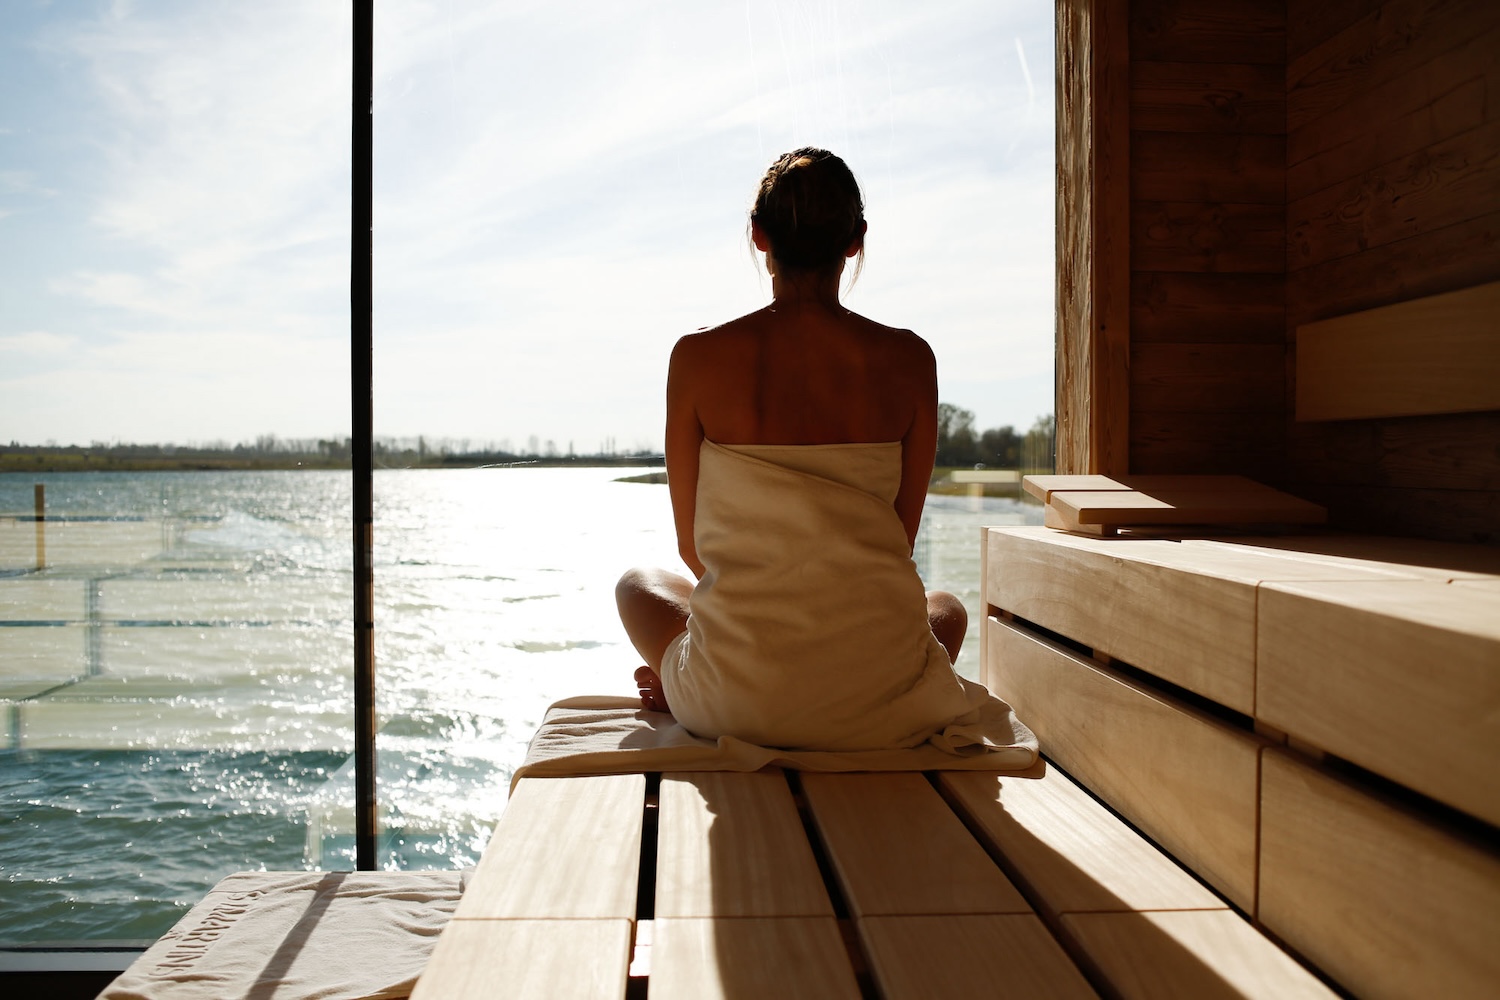 Woman in sauna looking out over water